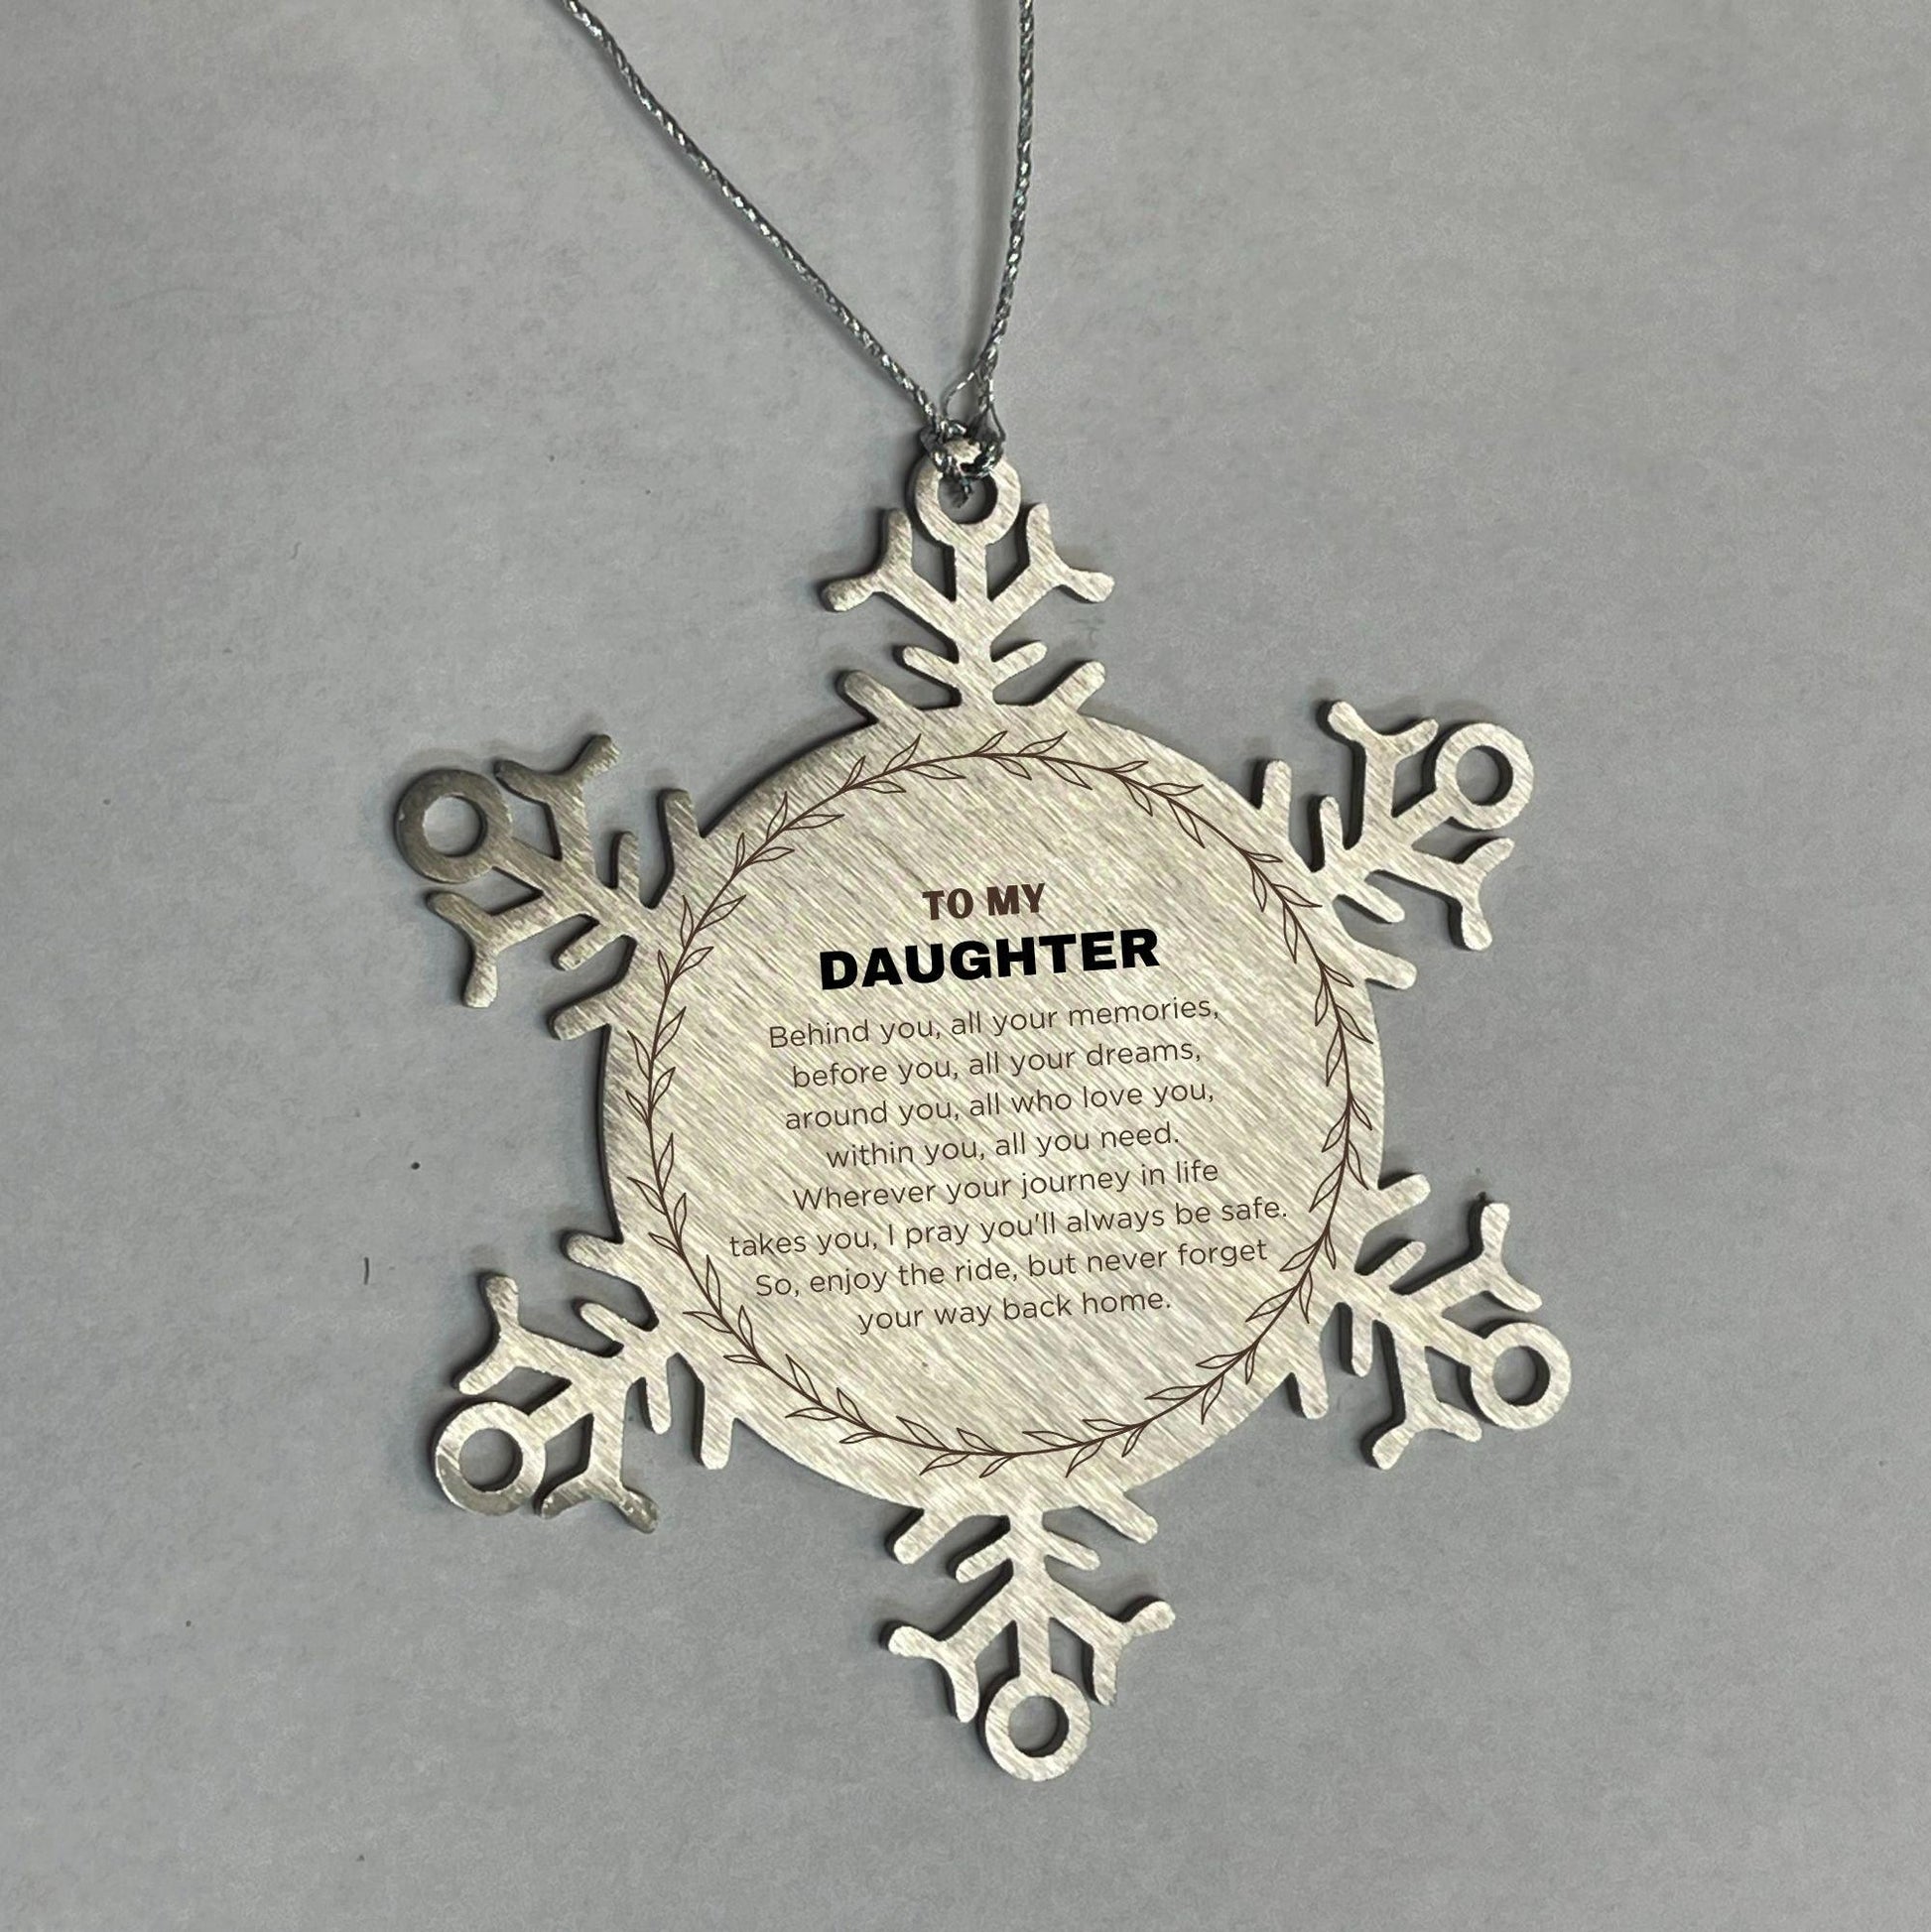 Inspirational Daughter Snowflake Ornament - Behind you, all your Memories, Before you, all your Dreams - Birthday, Christmas Holiday Gifts - Mallard Moon Gift Shop